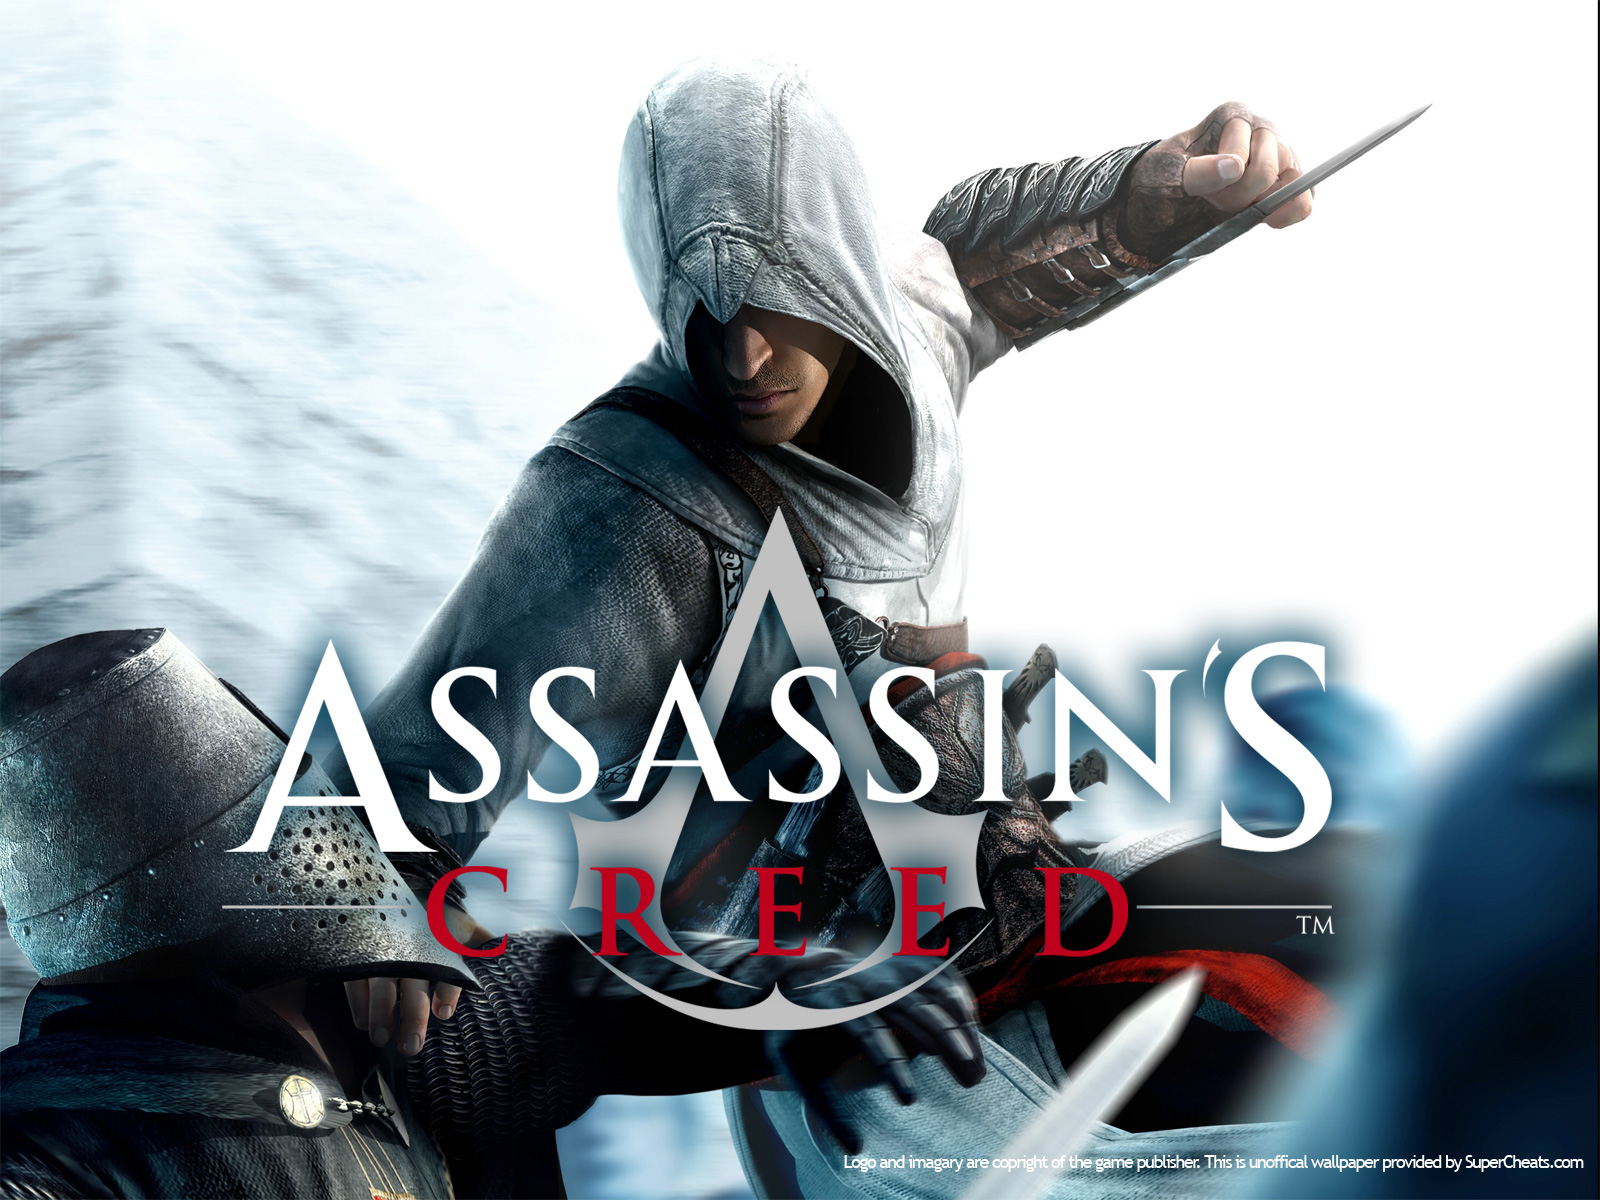 AsSaSsin's CreeD